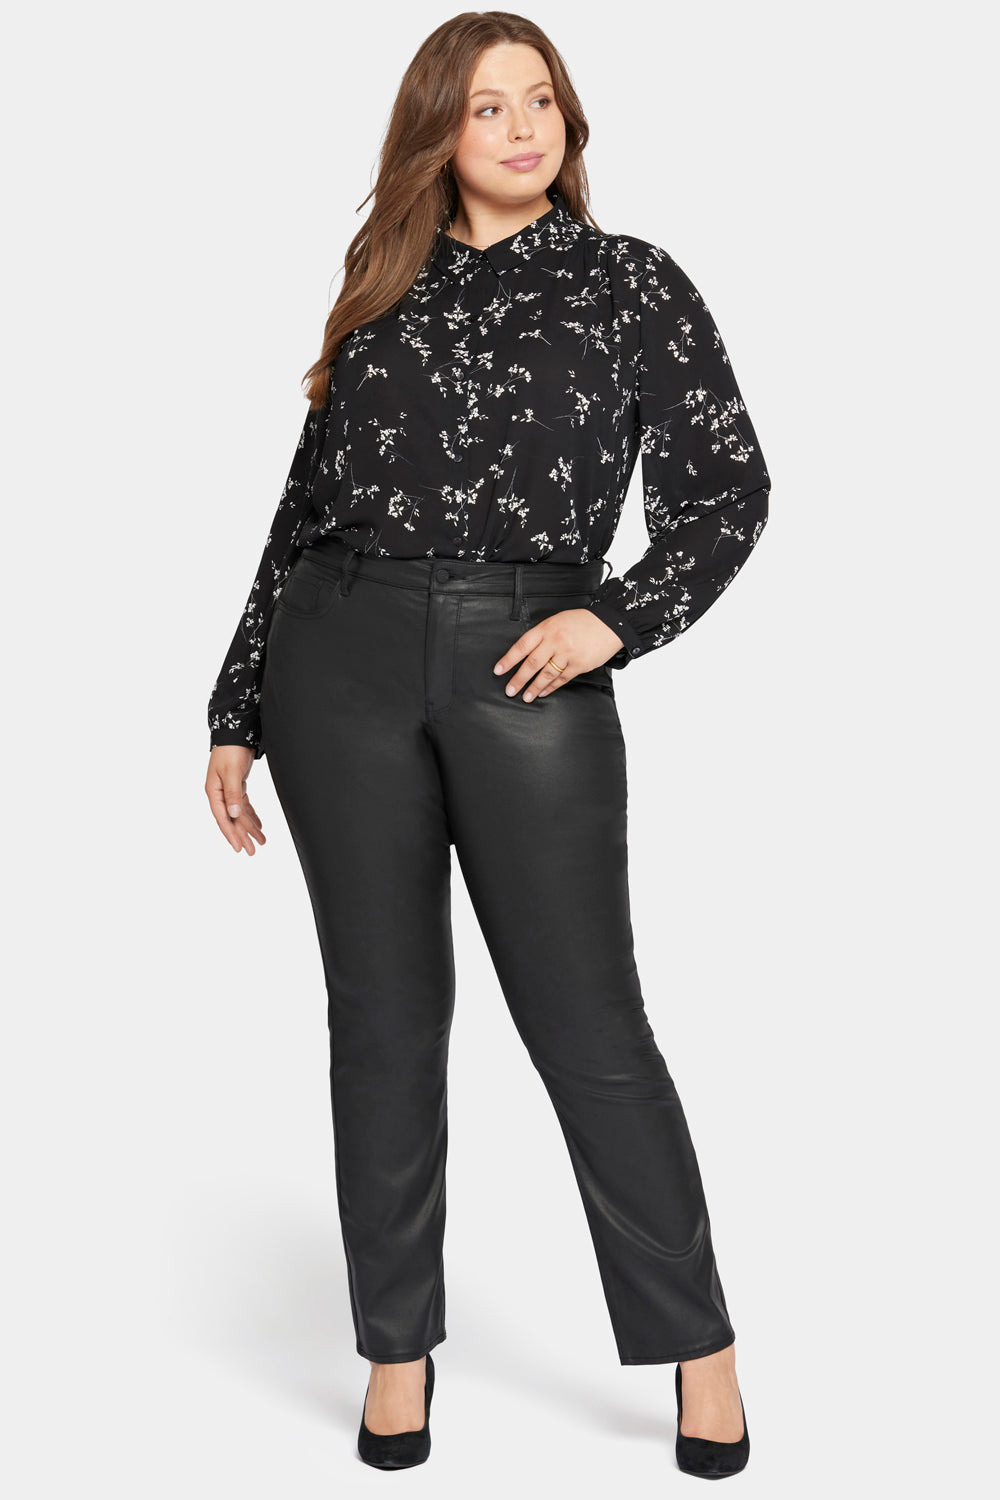 Pull-On Flared Trouser Pants In Plus Size Sculpt-Her™ Collection - Black  Black | NYDJ